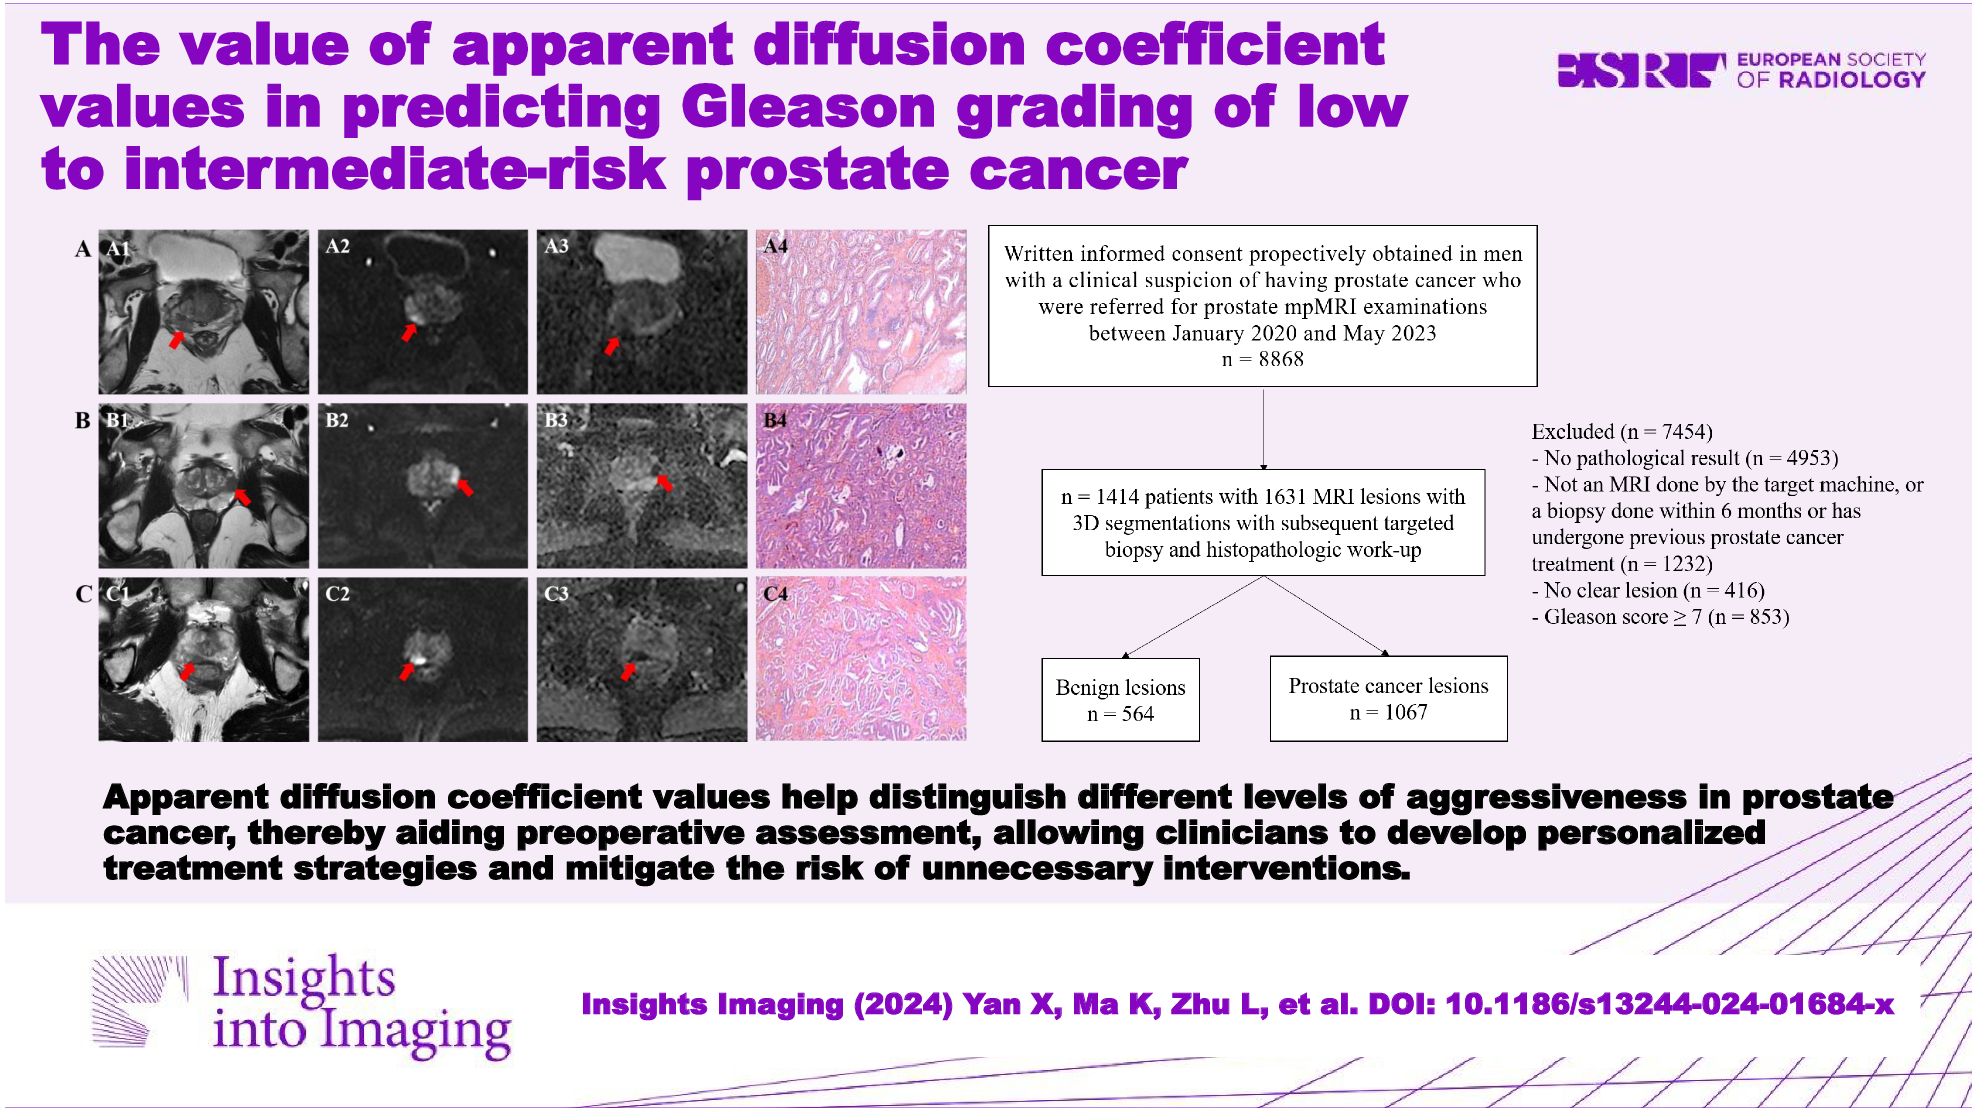 The value of apparent diffusion coefficient values in predicting Gleason grading of low to intermediate-risk prostate cancer